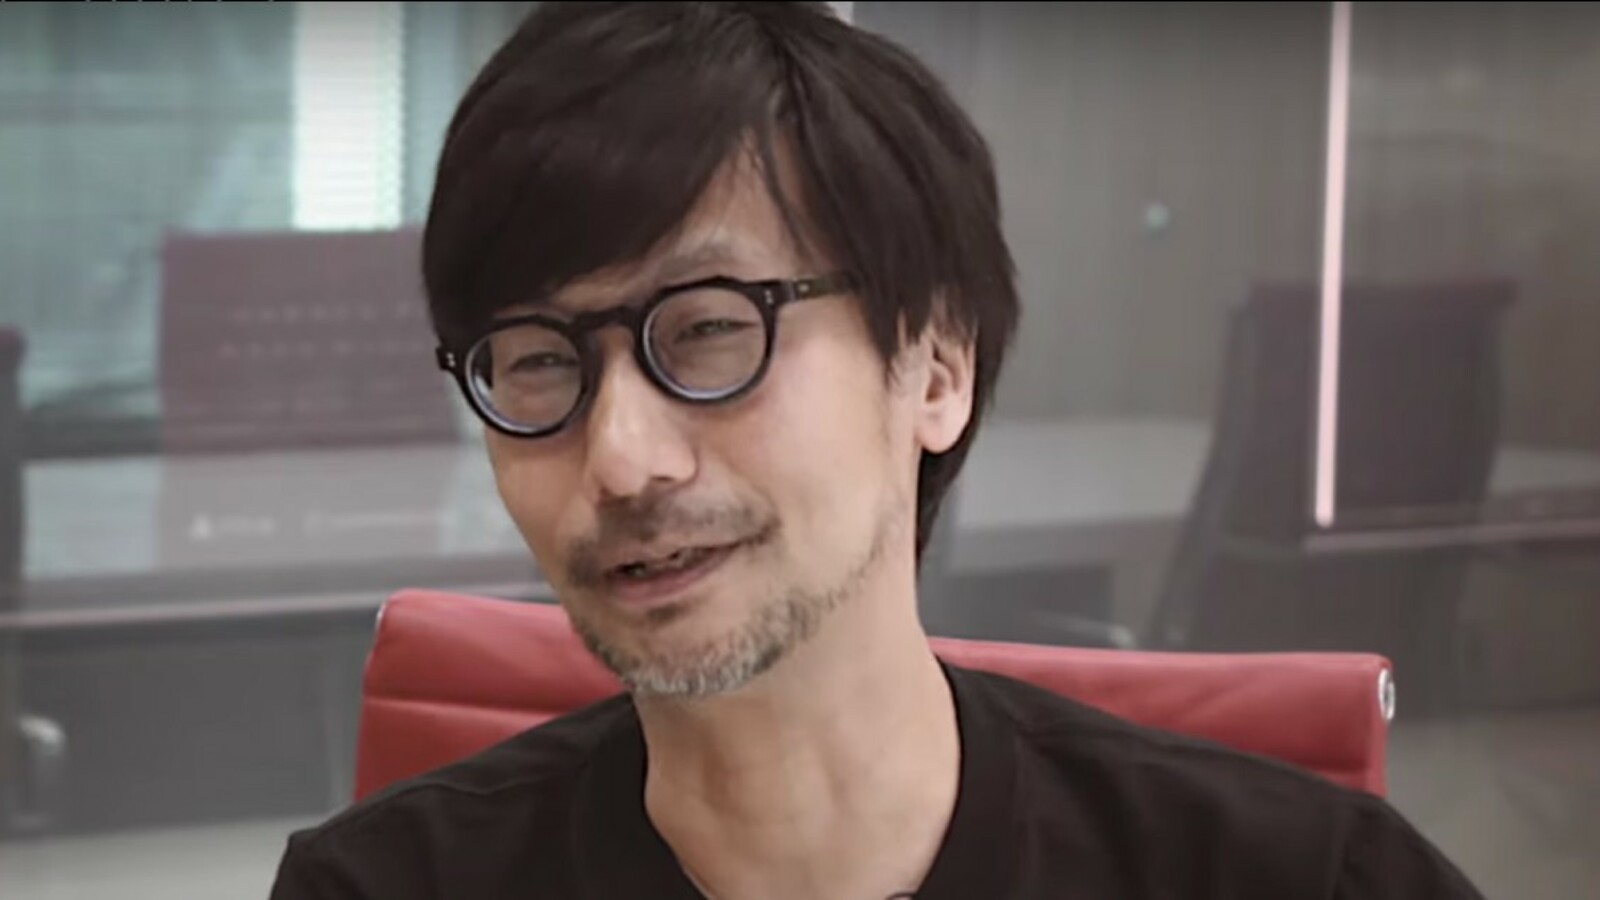 Screw dying, says Hideo Kojima, 'I'll probably become an AI and stick  around